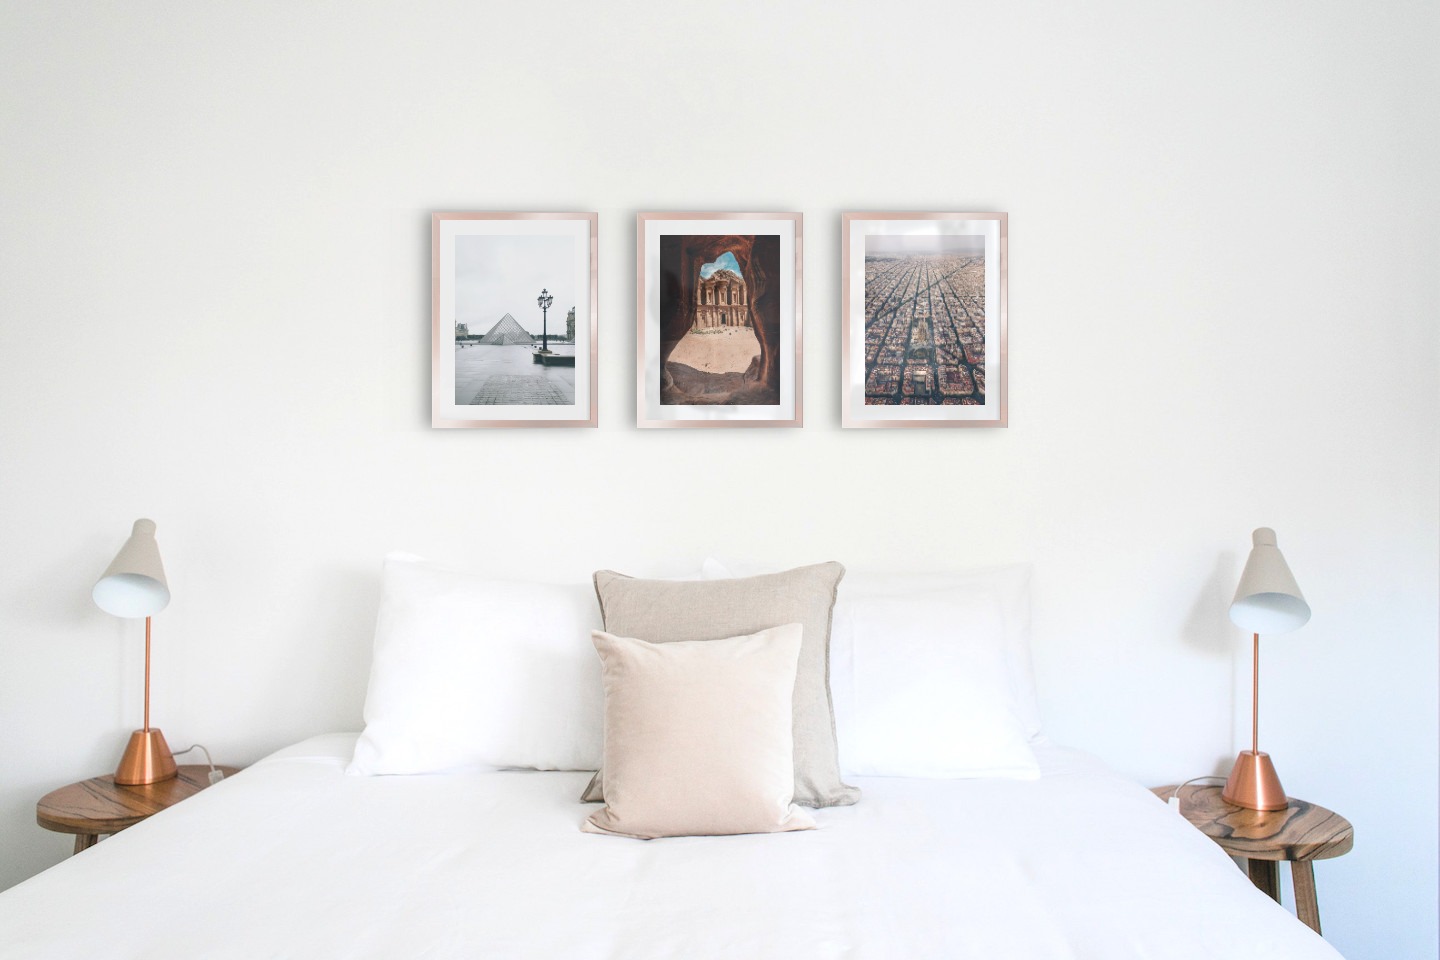 Gallery wall with picture frames in copper in sizes 30x40 with prints "Louvre in Paris", "Petra in Jordan" and "Barcelona city center"